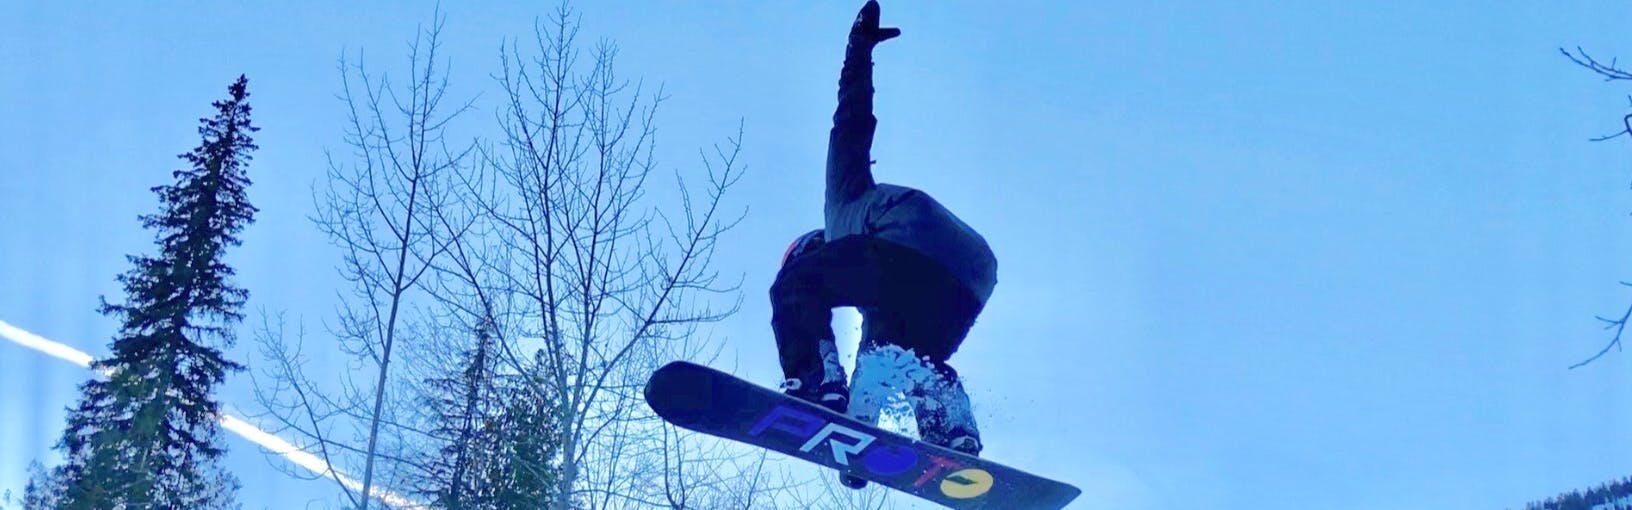 Man on performing a snowboard jump trick in the air